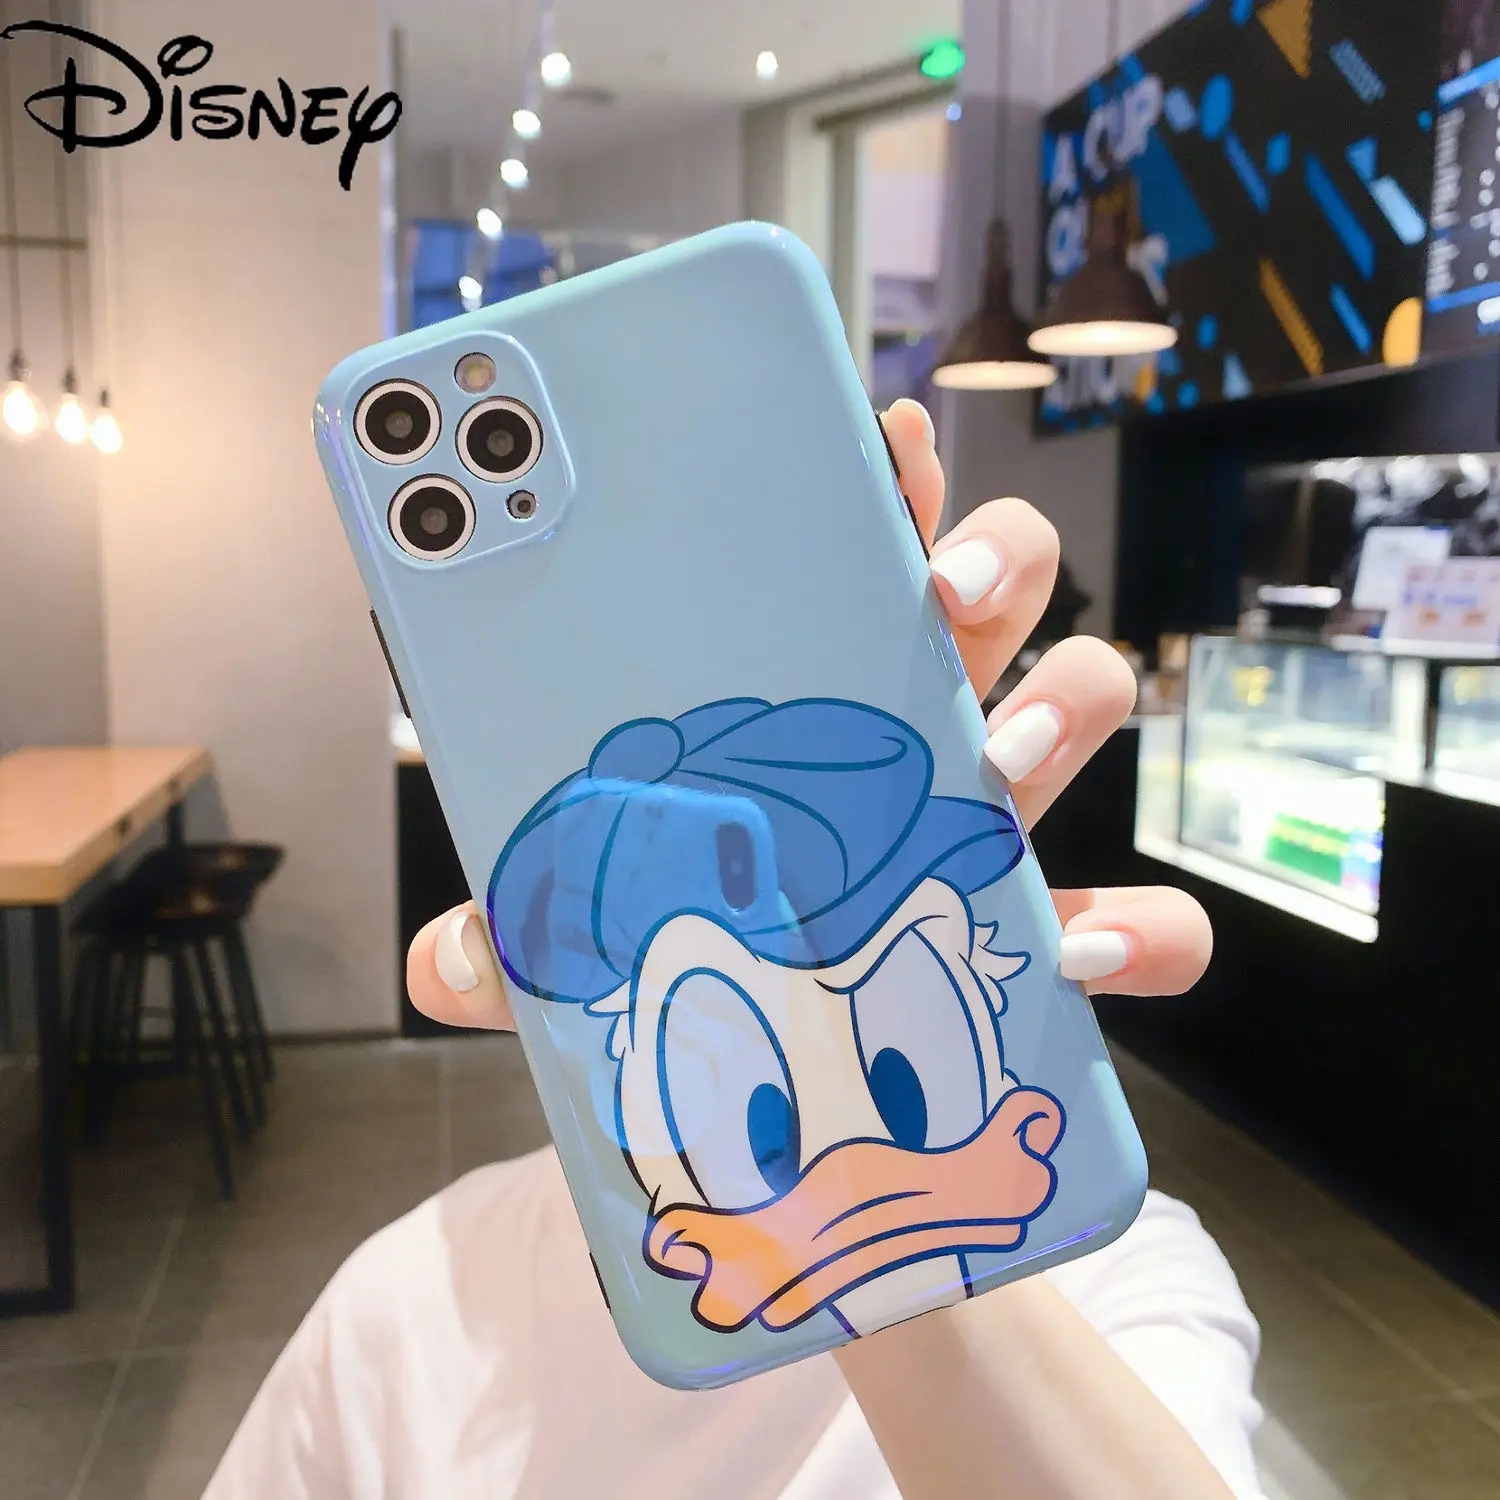 

Disney Donald Duck Blu-ray cartoon cute couple mobile phone case with stand for iPhone12mini /12promax/iPhonex/xs xr/8plus